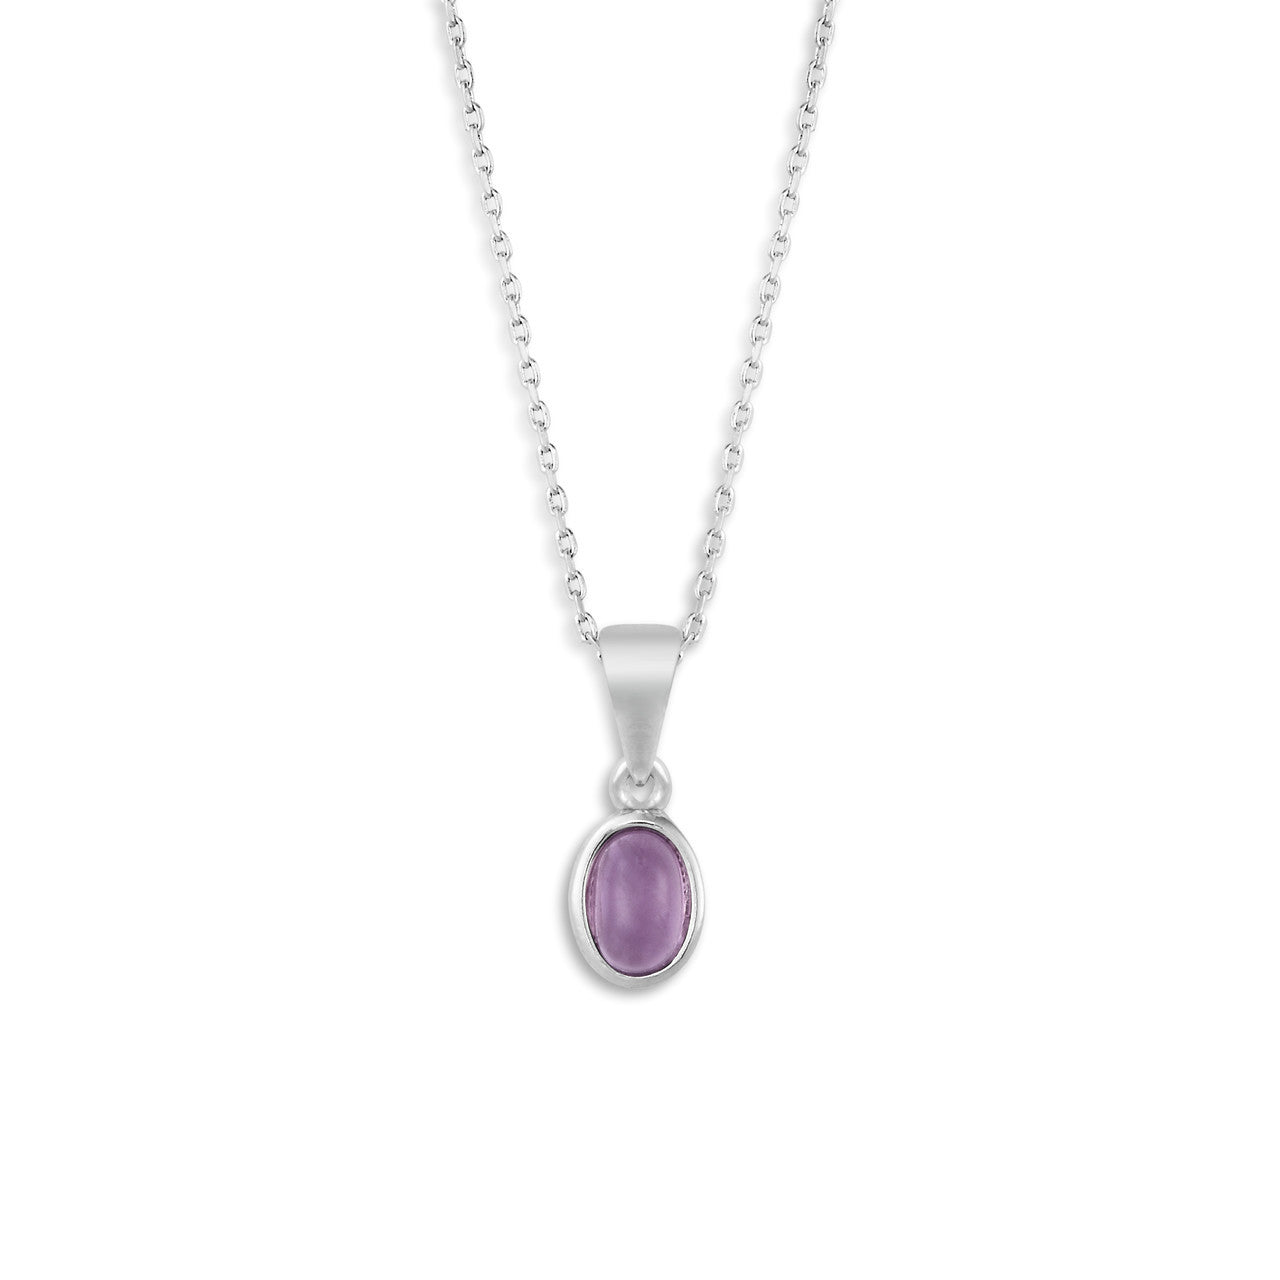 The Giving Necklace - Amethyst